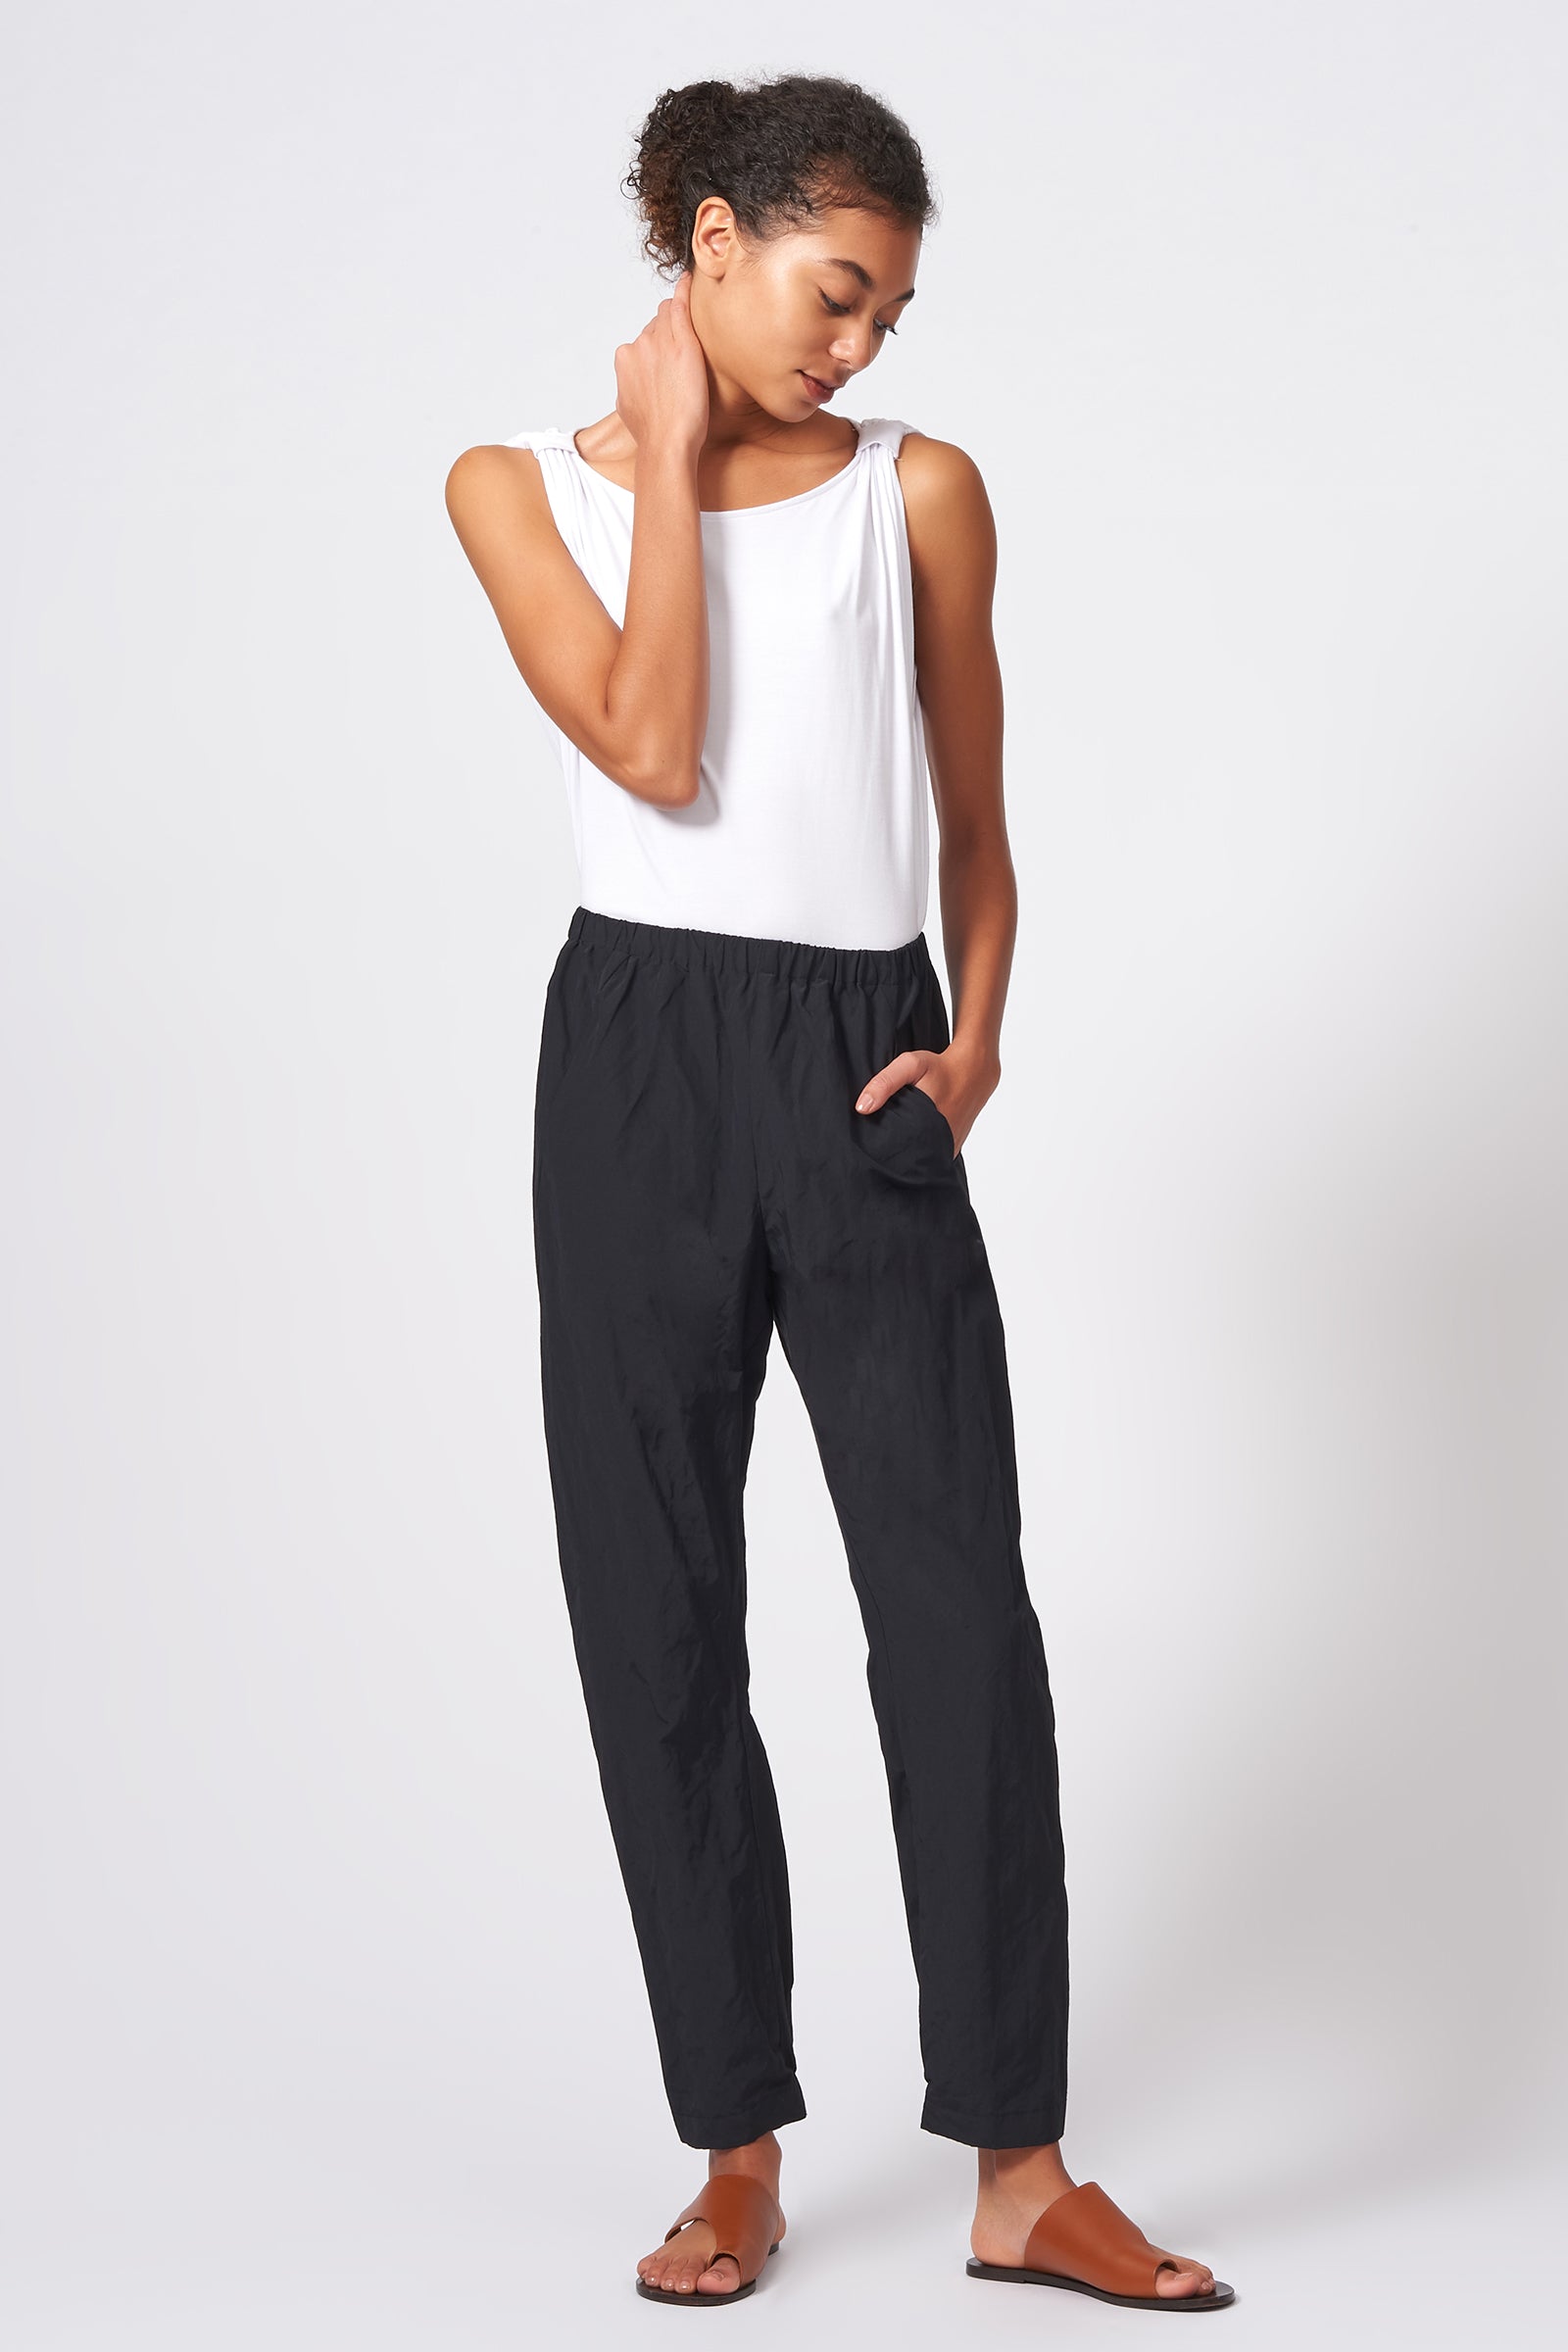 Kal Rieman Angle Seam Jogger in Black Cotton Nylon on Model Front Side Full View